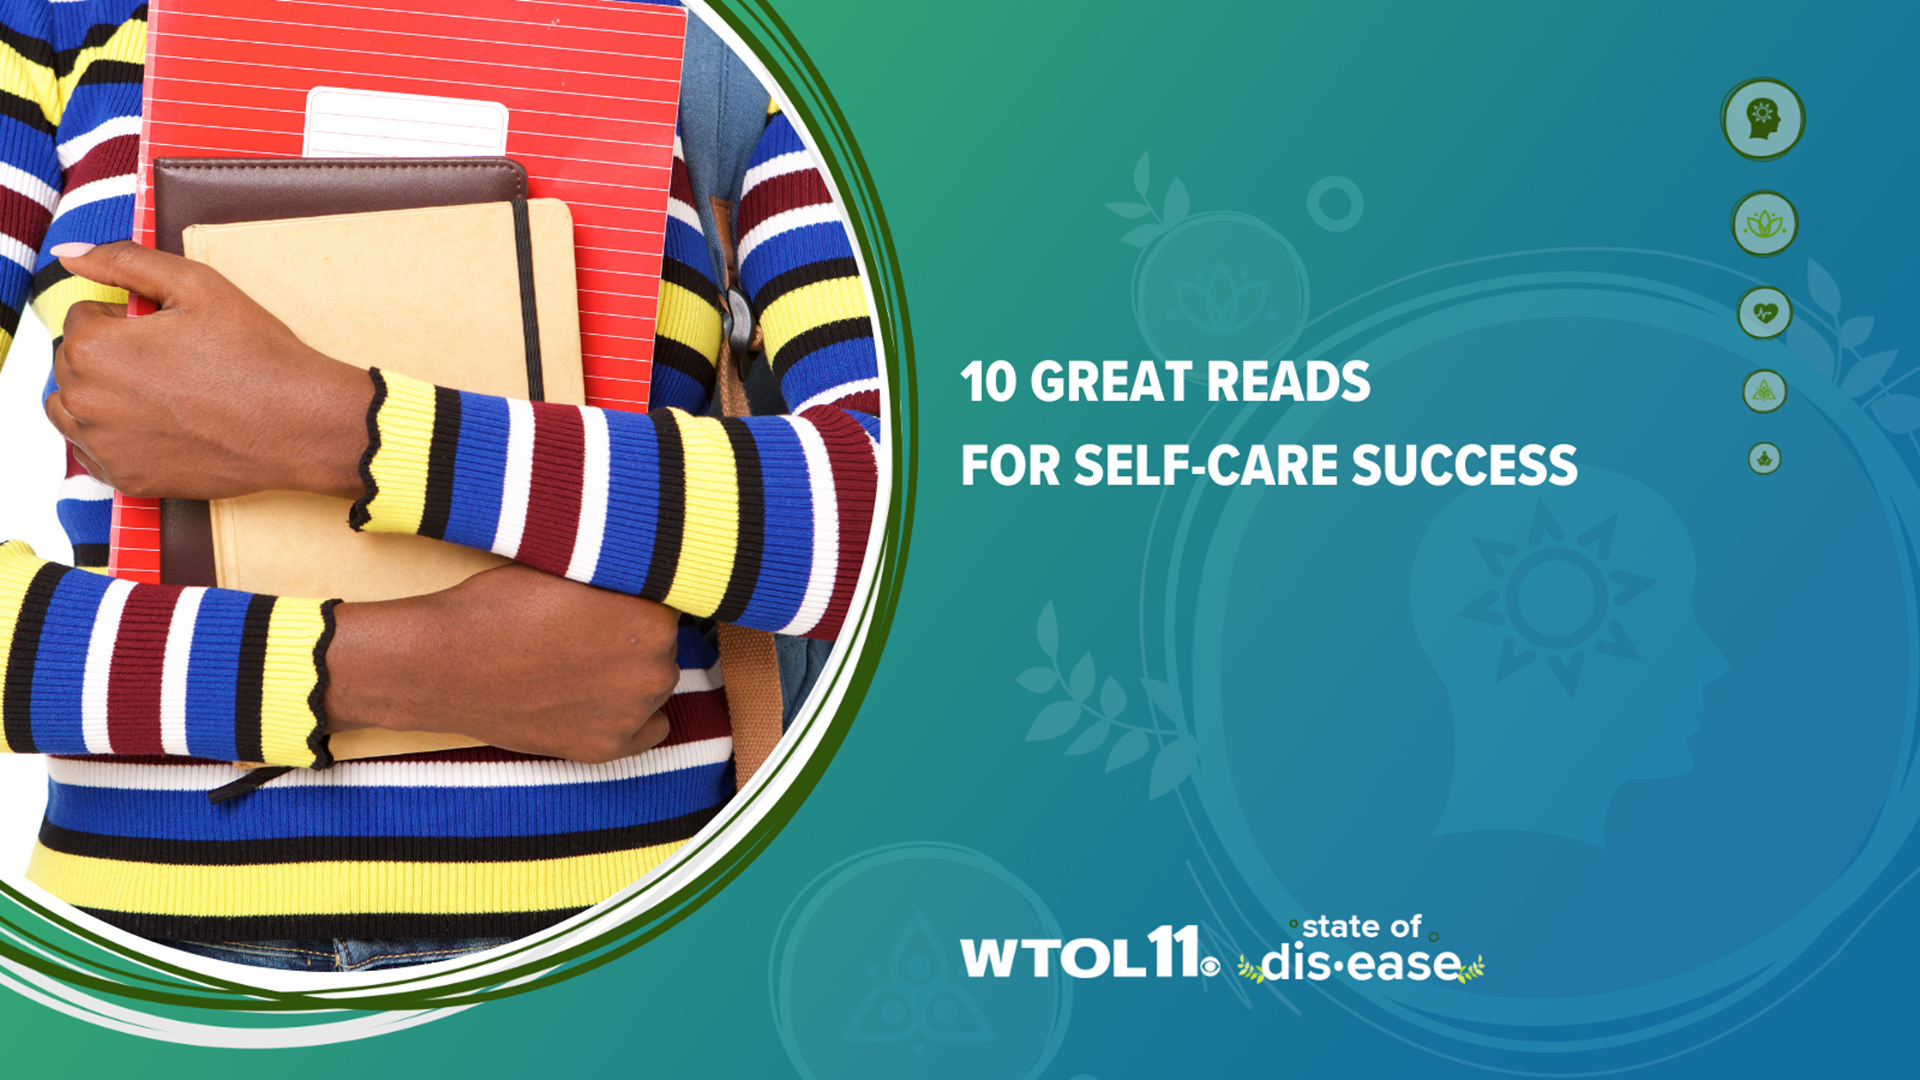 Find a great read that can help you through life stressors with this top 10 list